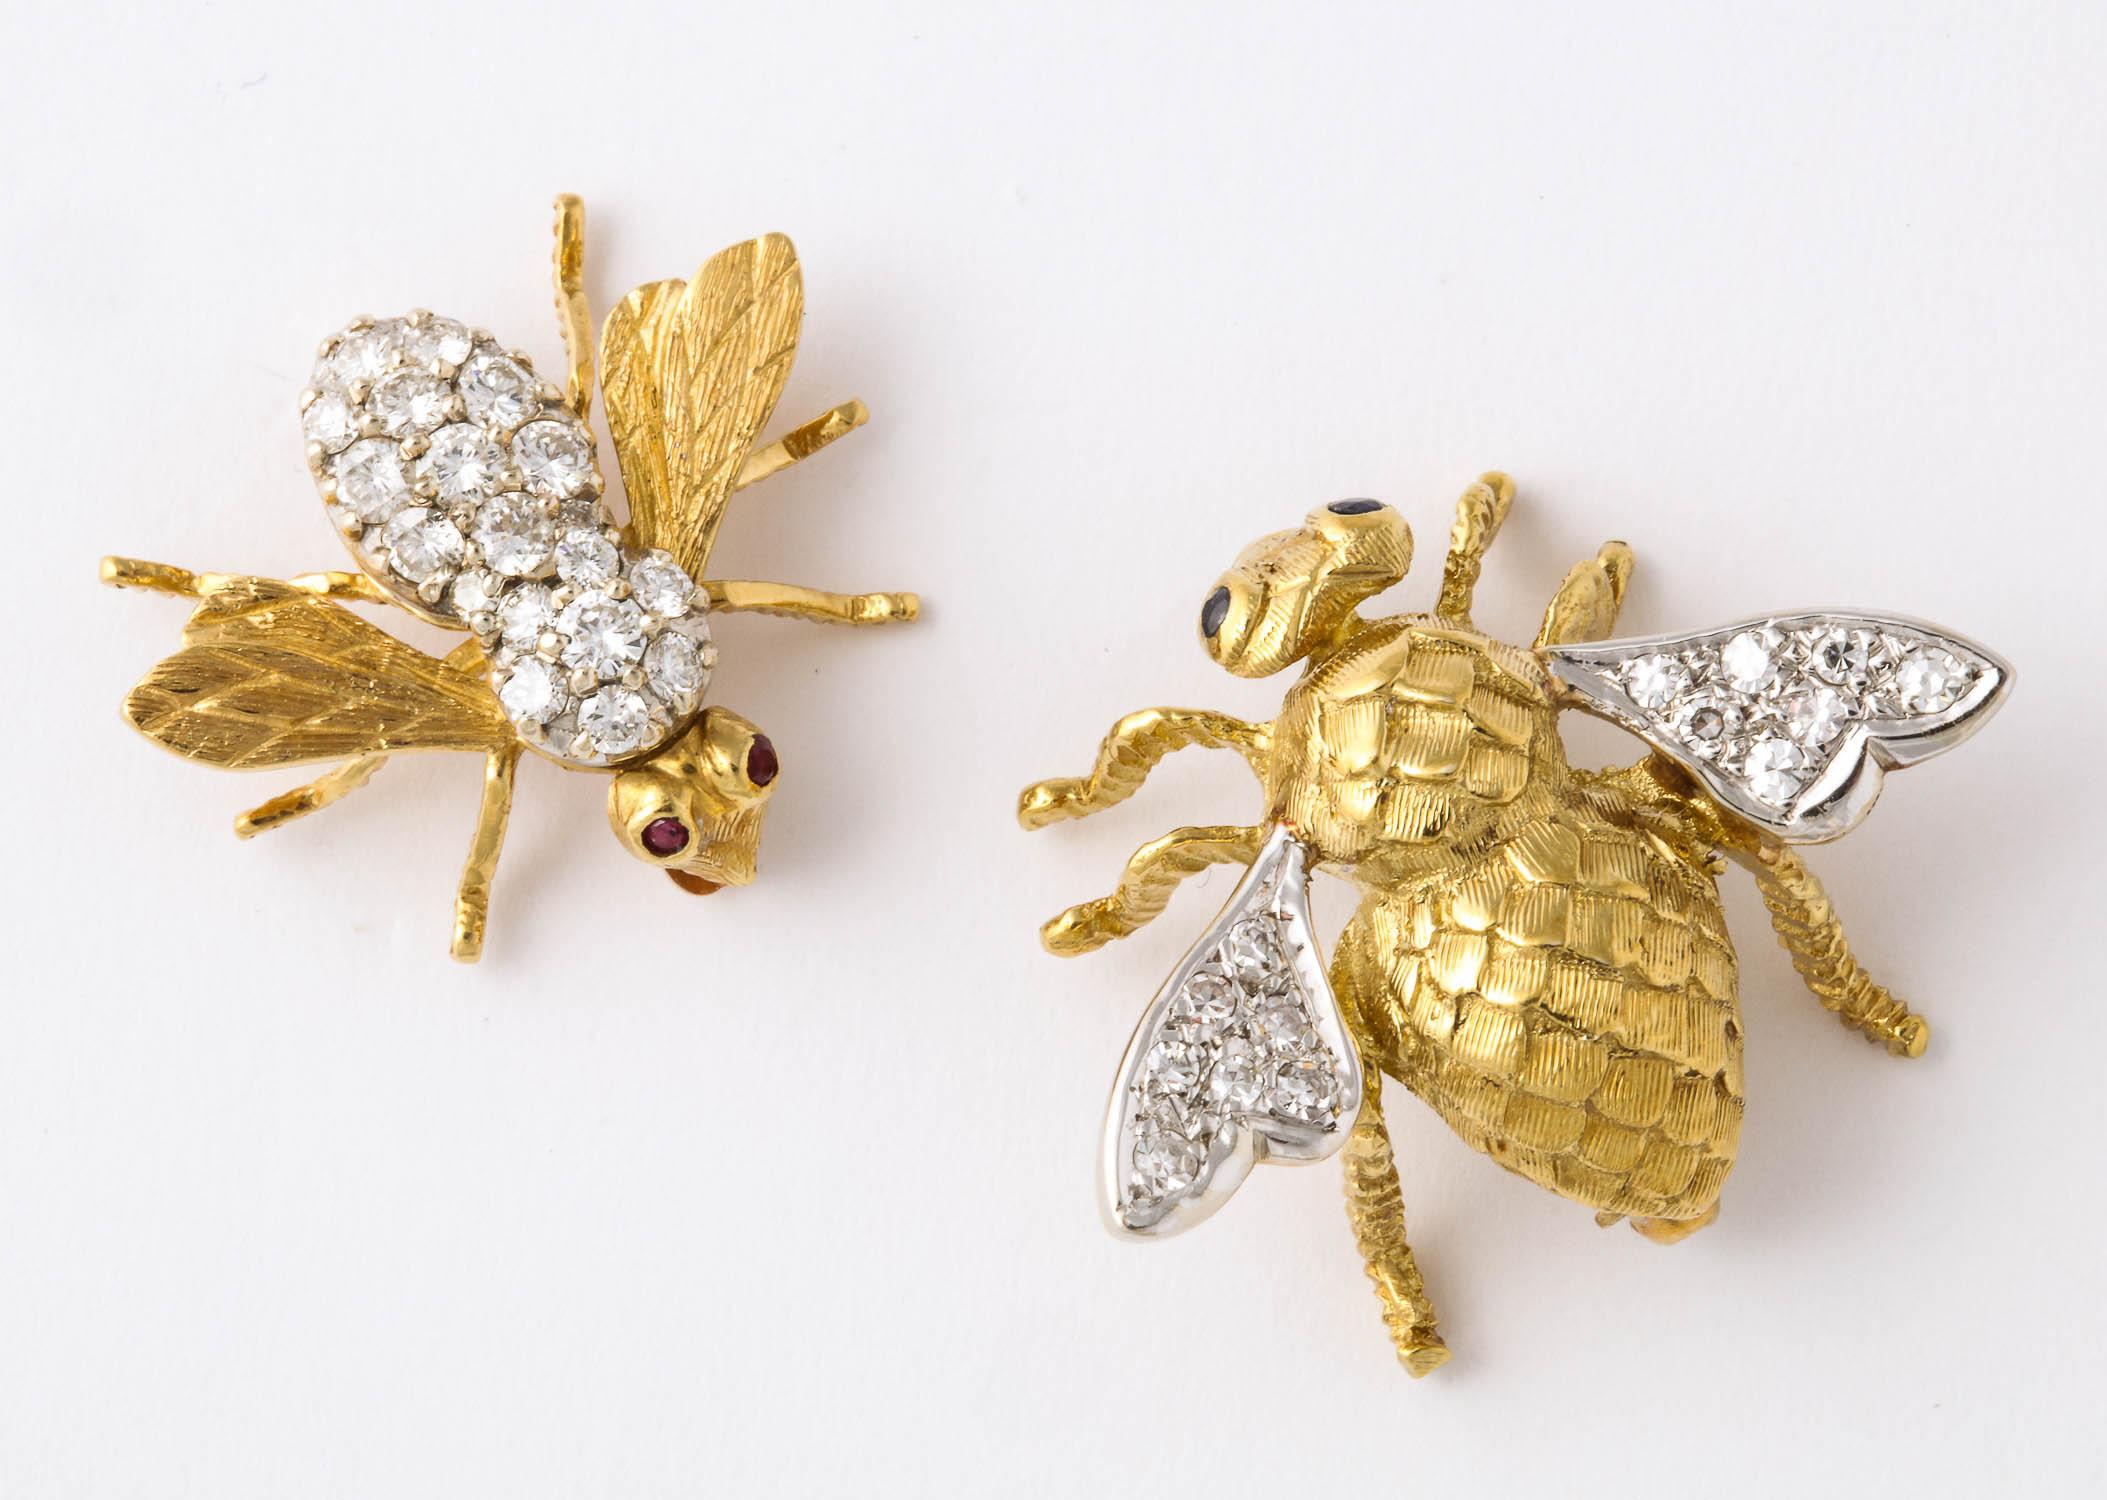 Stunning, beautifully 18k yellow gold and diamond handcrafted bee pins - classic.  Larger bee has diamond wings and an 18K gold body and legs. The smaller bee has a diamond body and 18K gold everywhere else. 

I don't want to separate them- they are